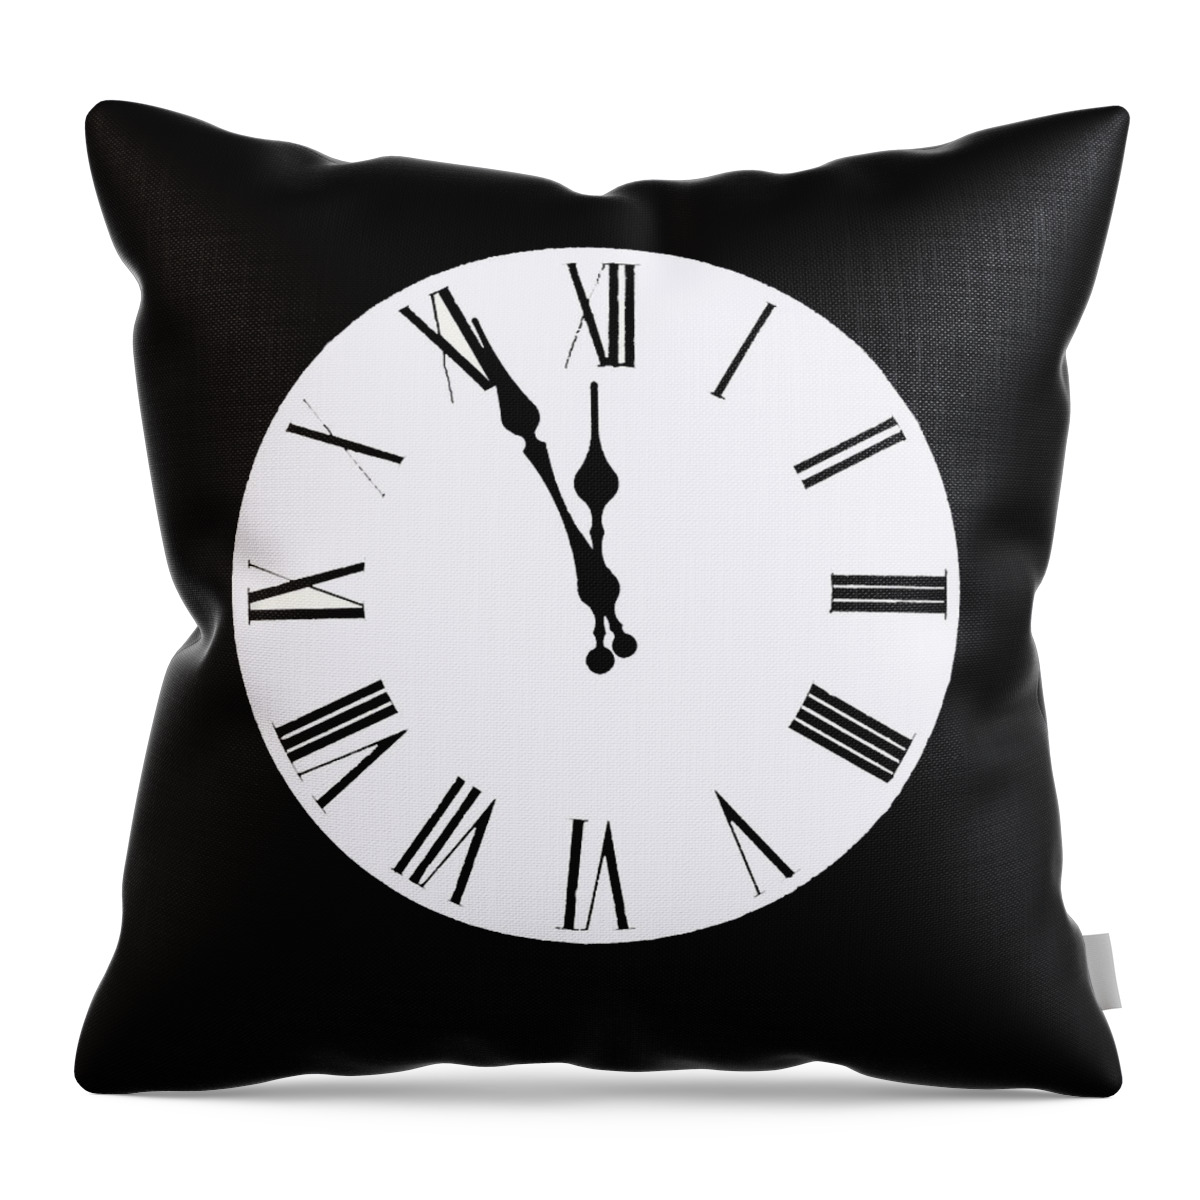 Clock Throw Pillow featuring the digital art And Then Time Stood Still by Ian MacDonald